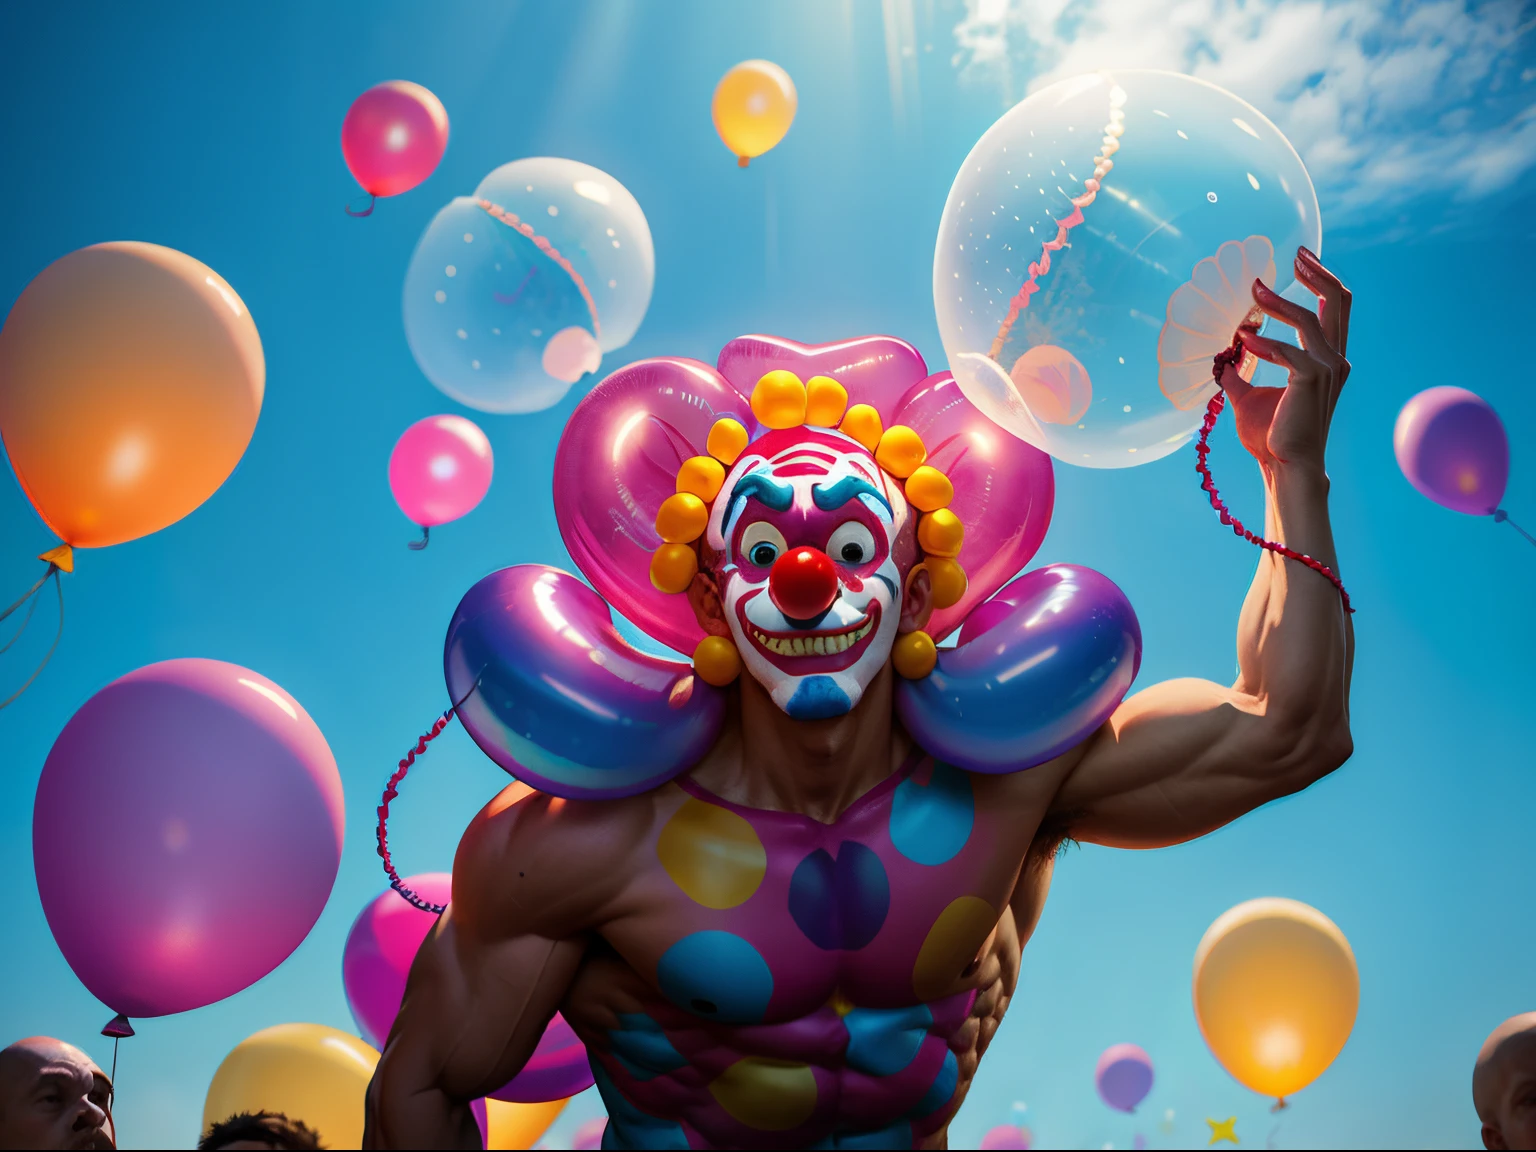 A sea of balloon jellyfish made by a muscular clown